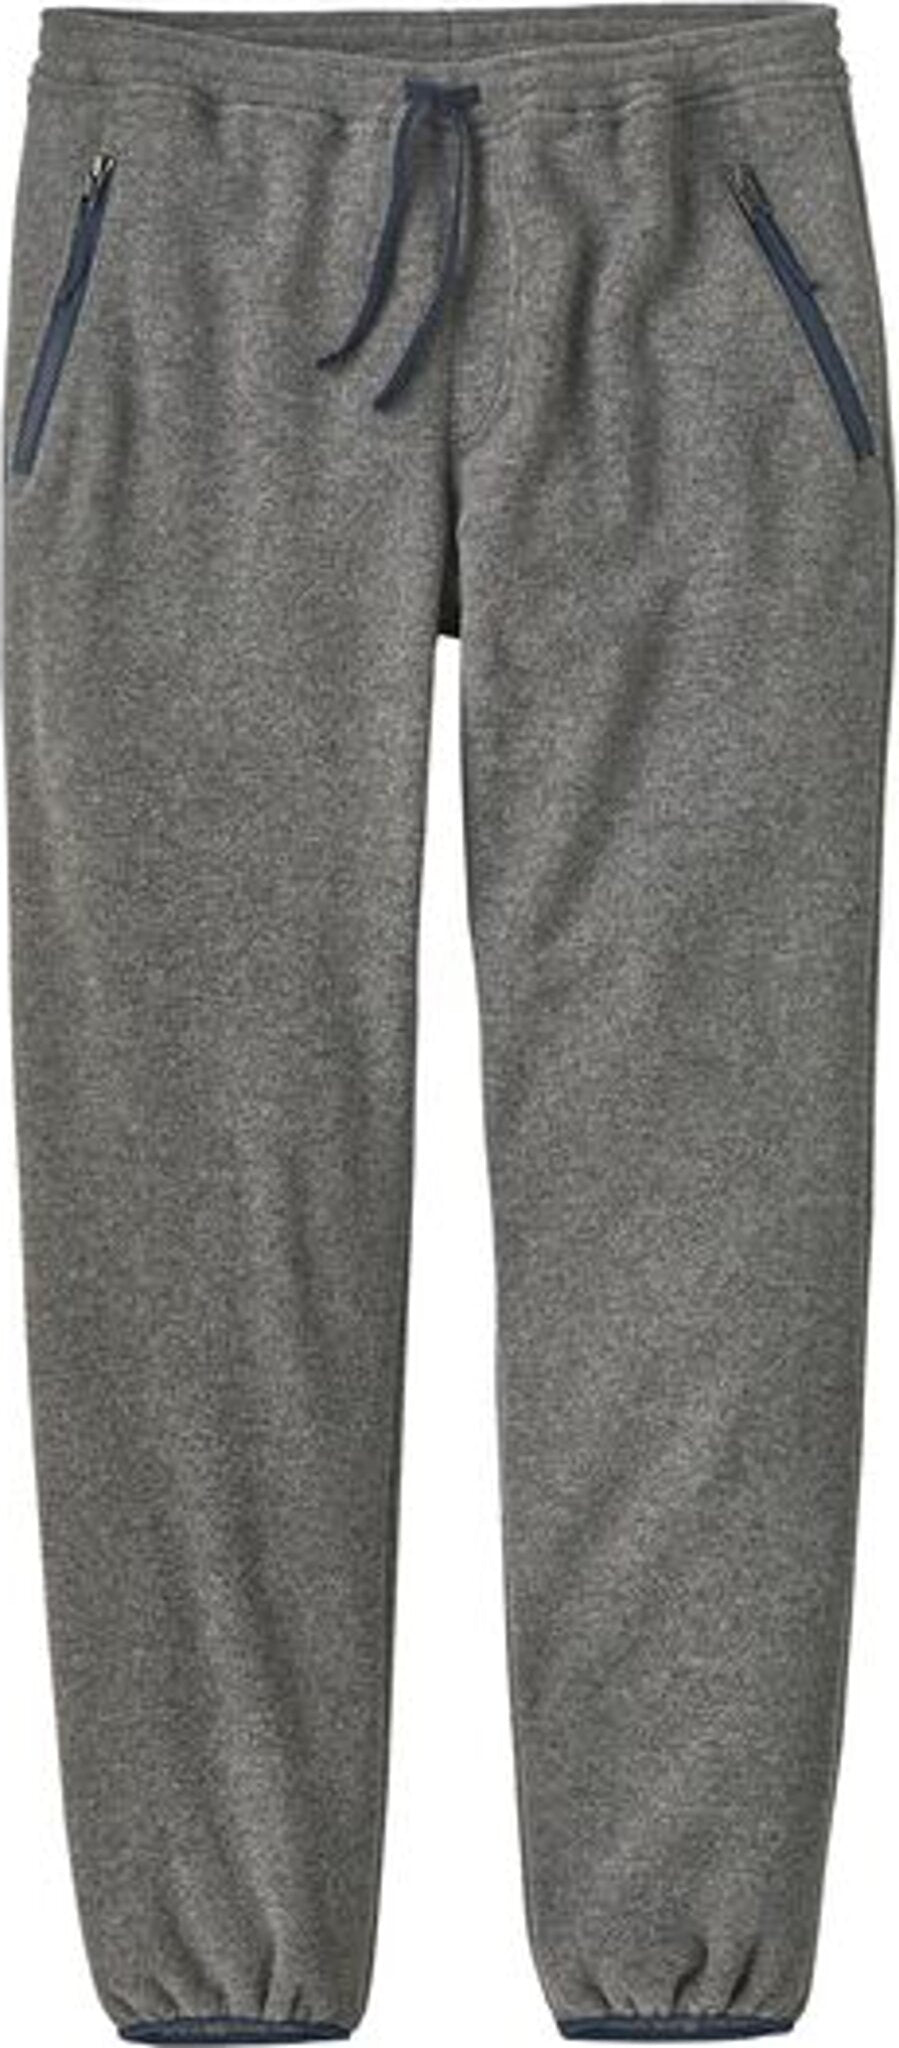 Patagonia Snap-T Pants, 27 Inseam - Womens, FREE SHIPPING in Canada